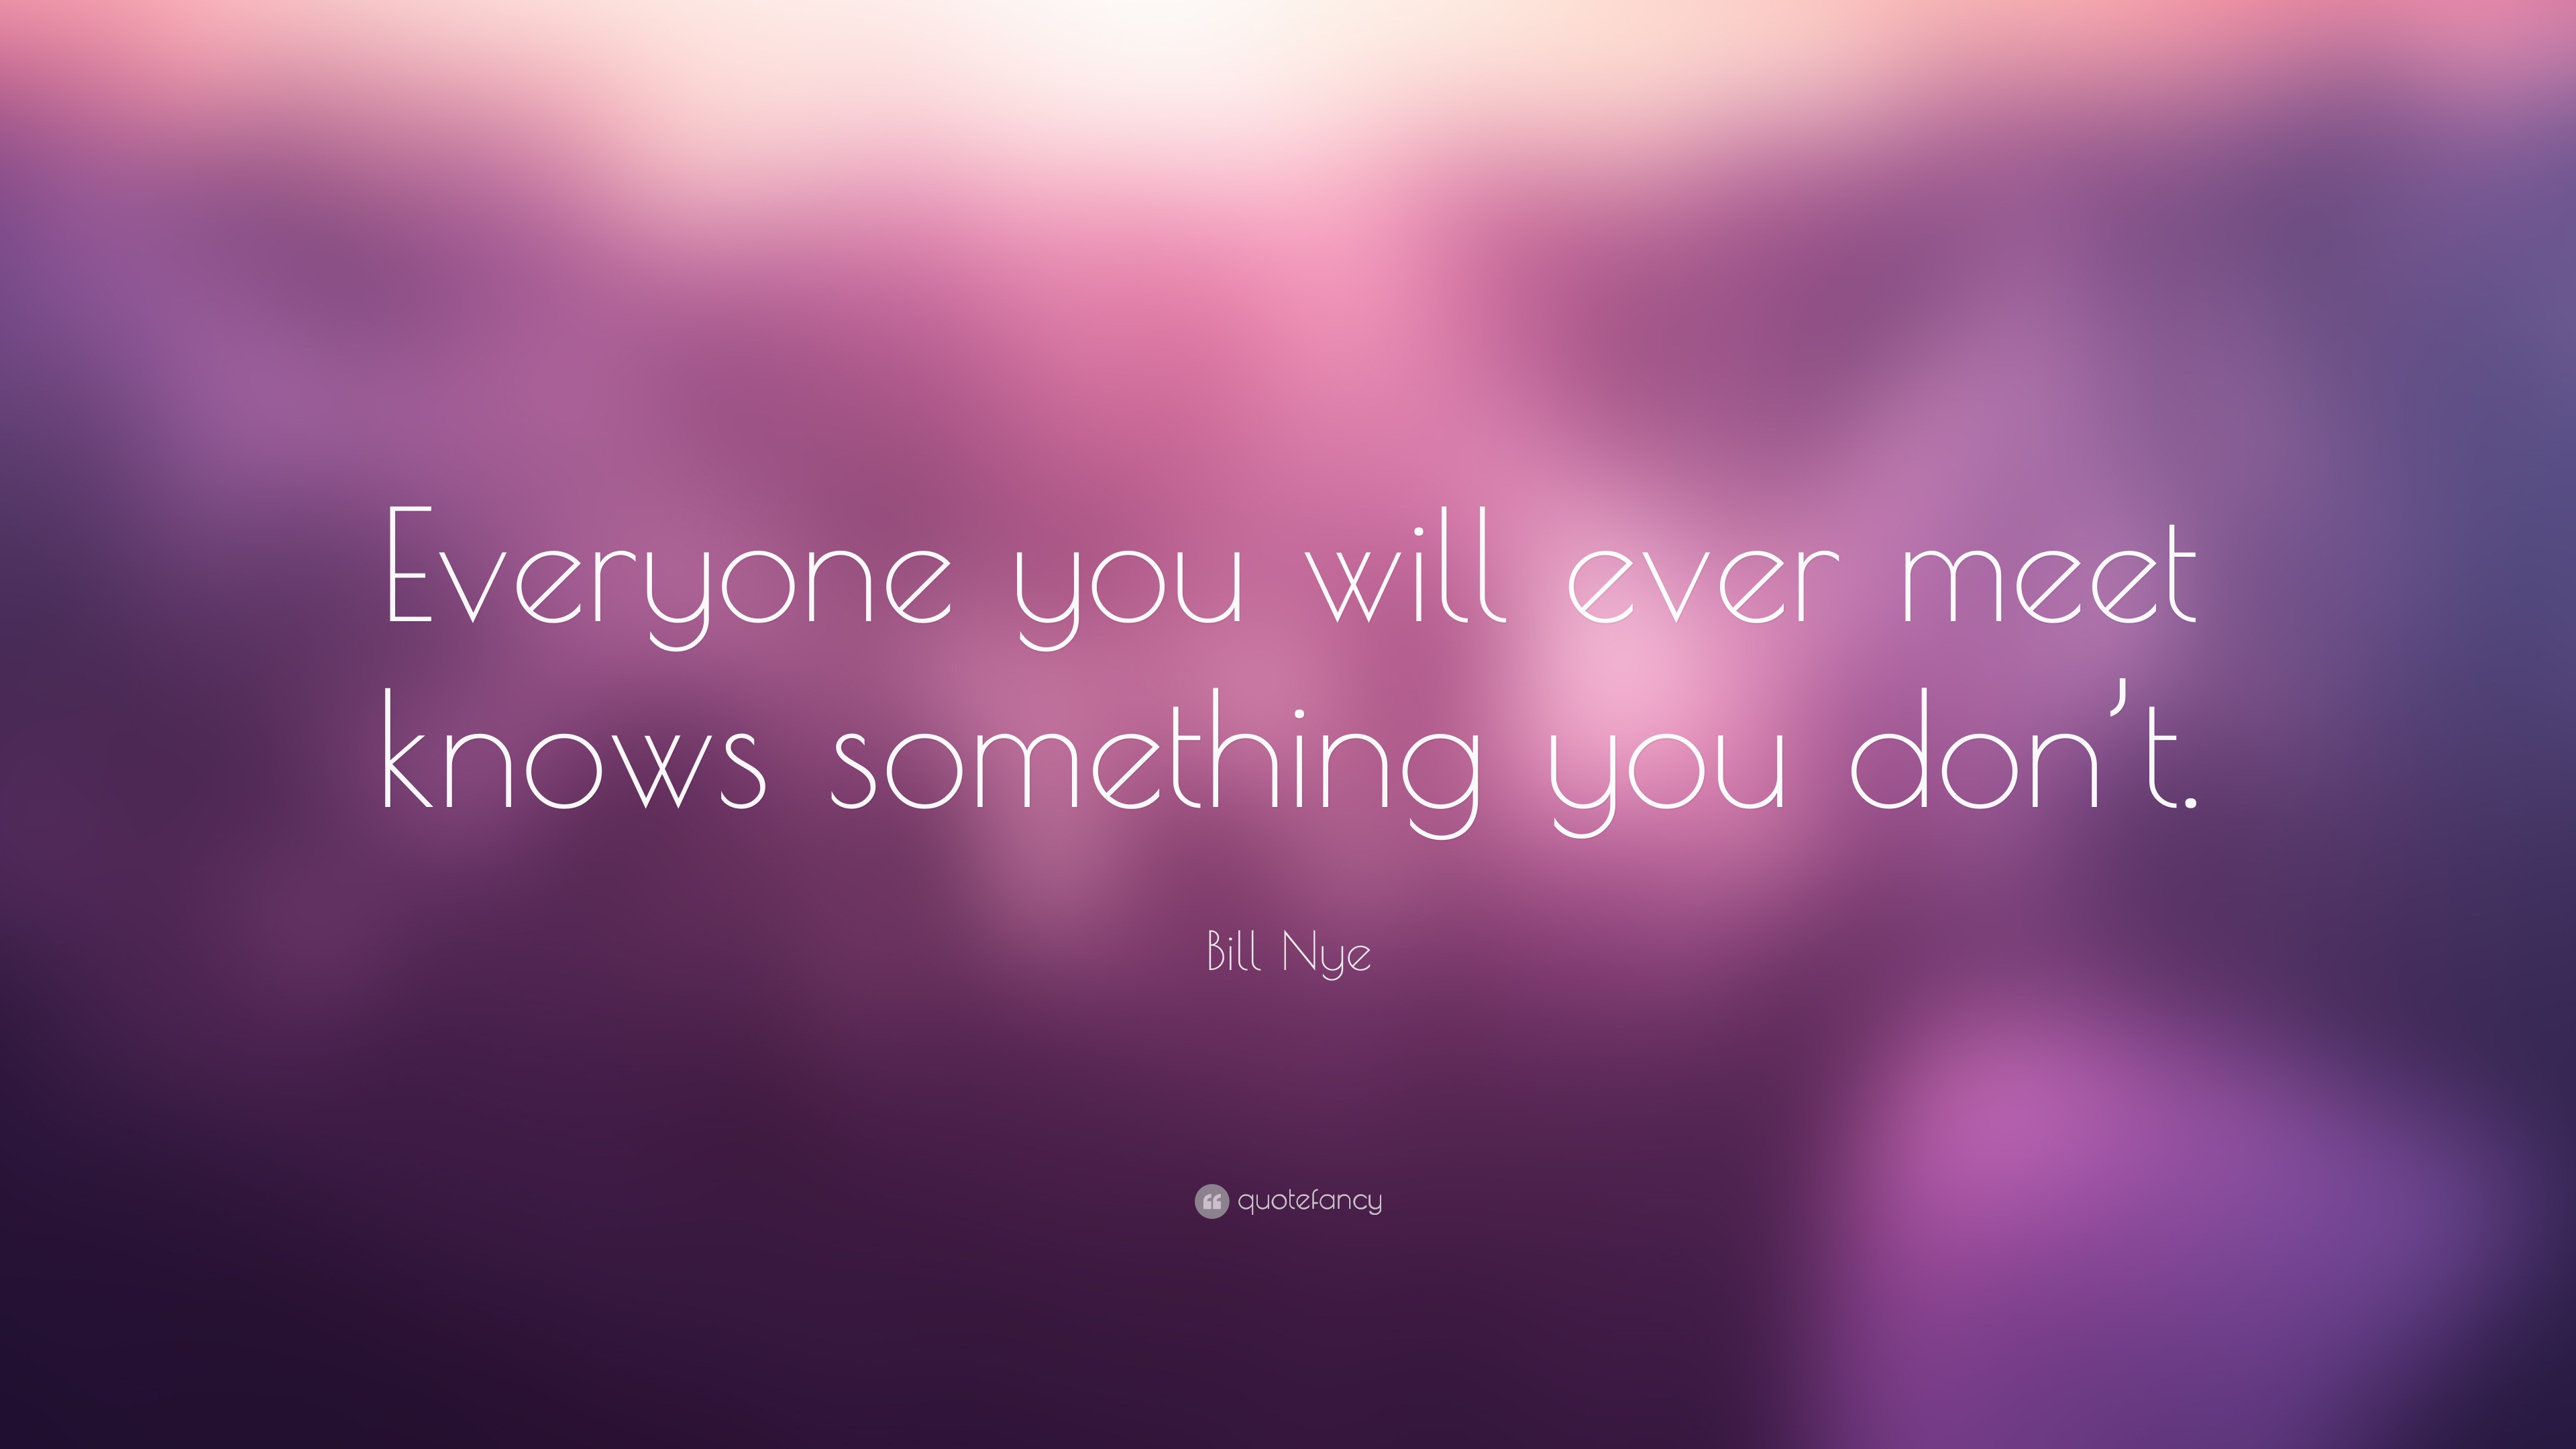 Bill Nye Quote: “Everyone you will ever meet knows something you don’t.”